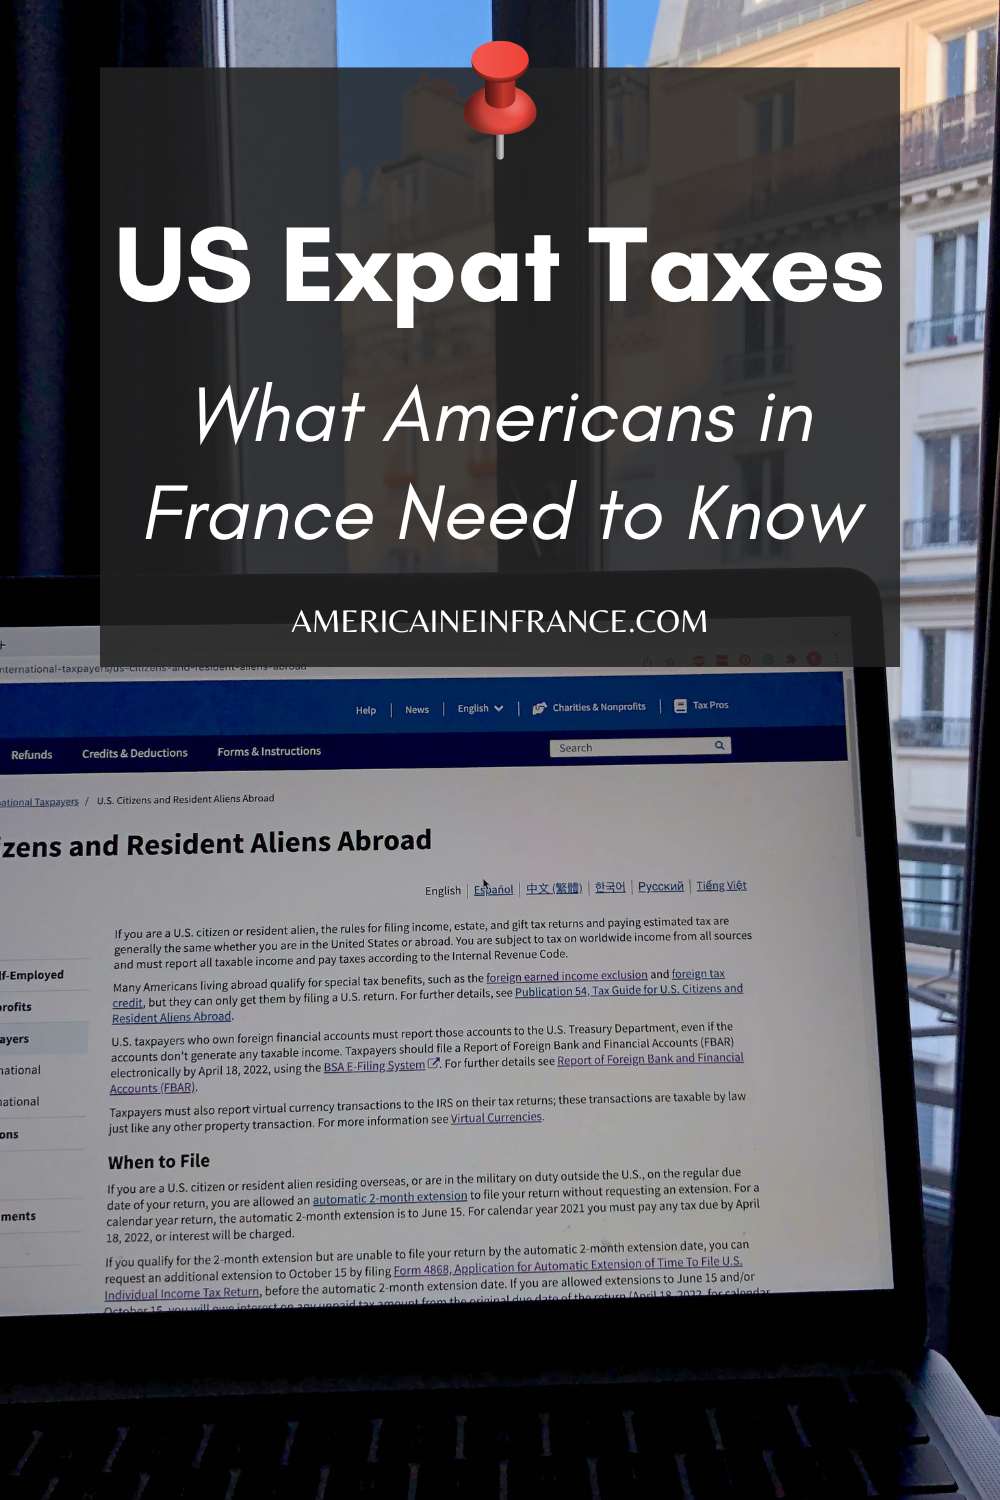 US Expat Taxes: What Americans Living in France Need to Know